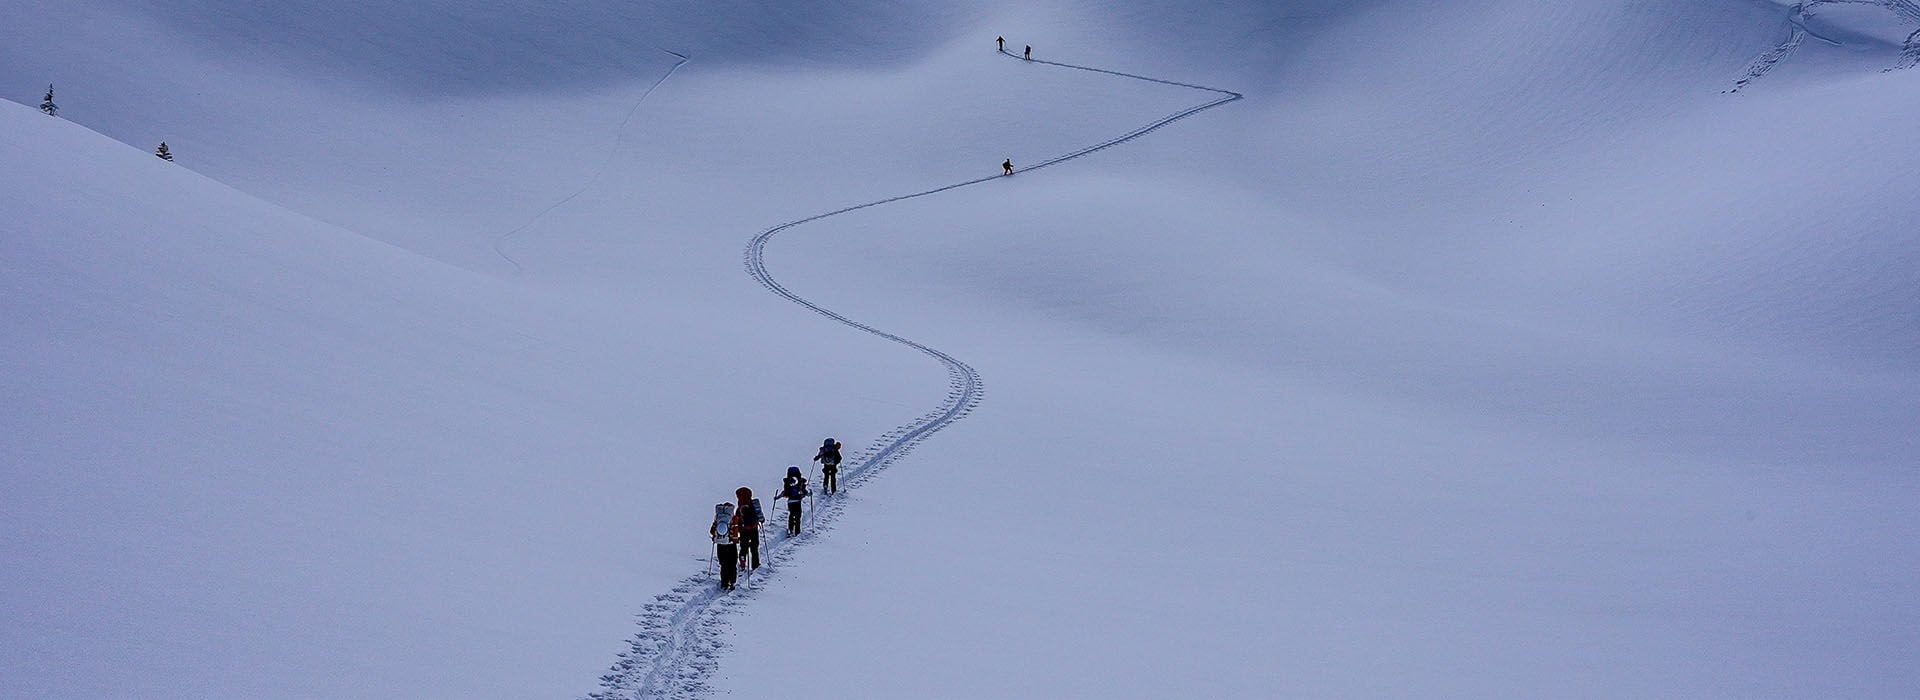 People hiking in the snow